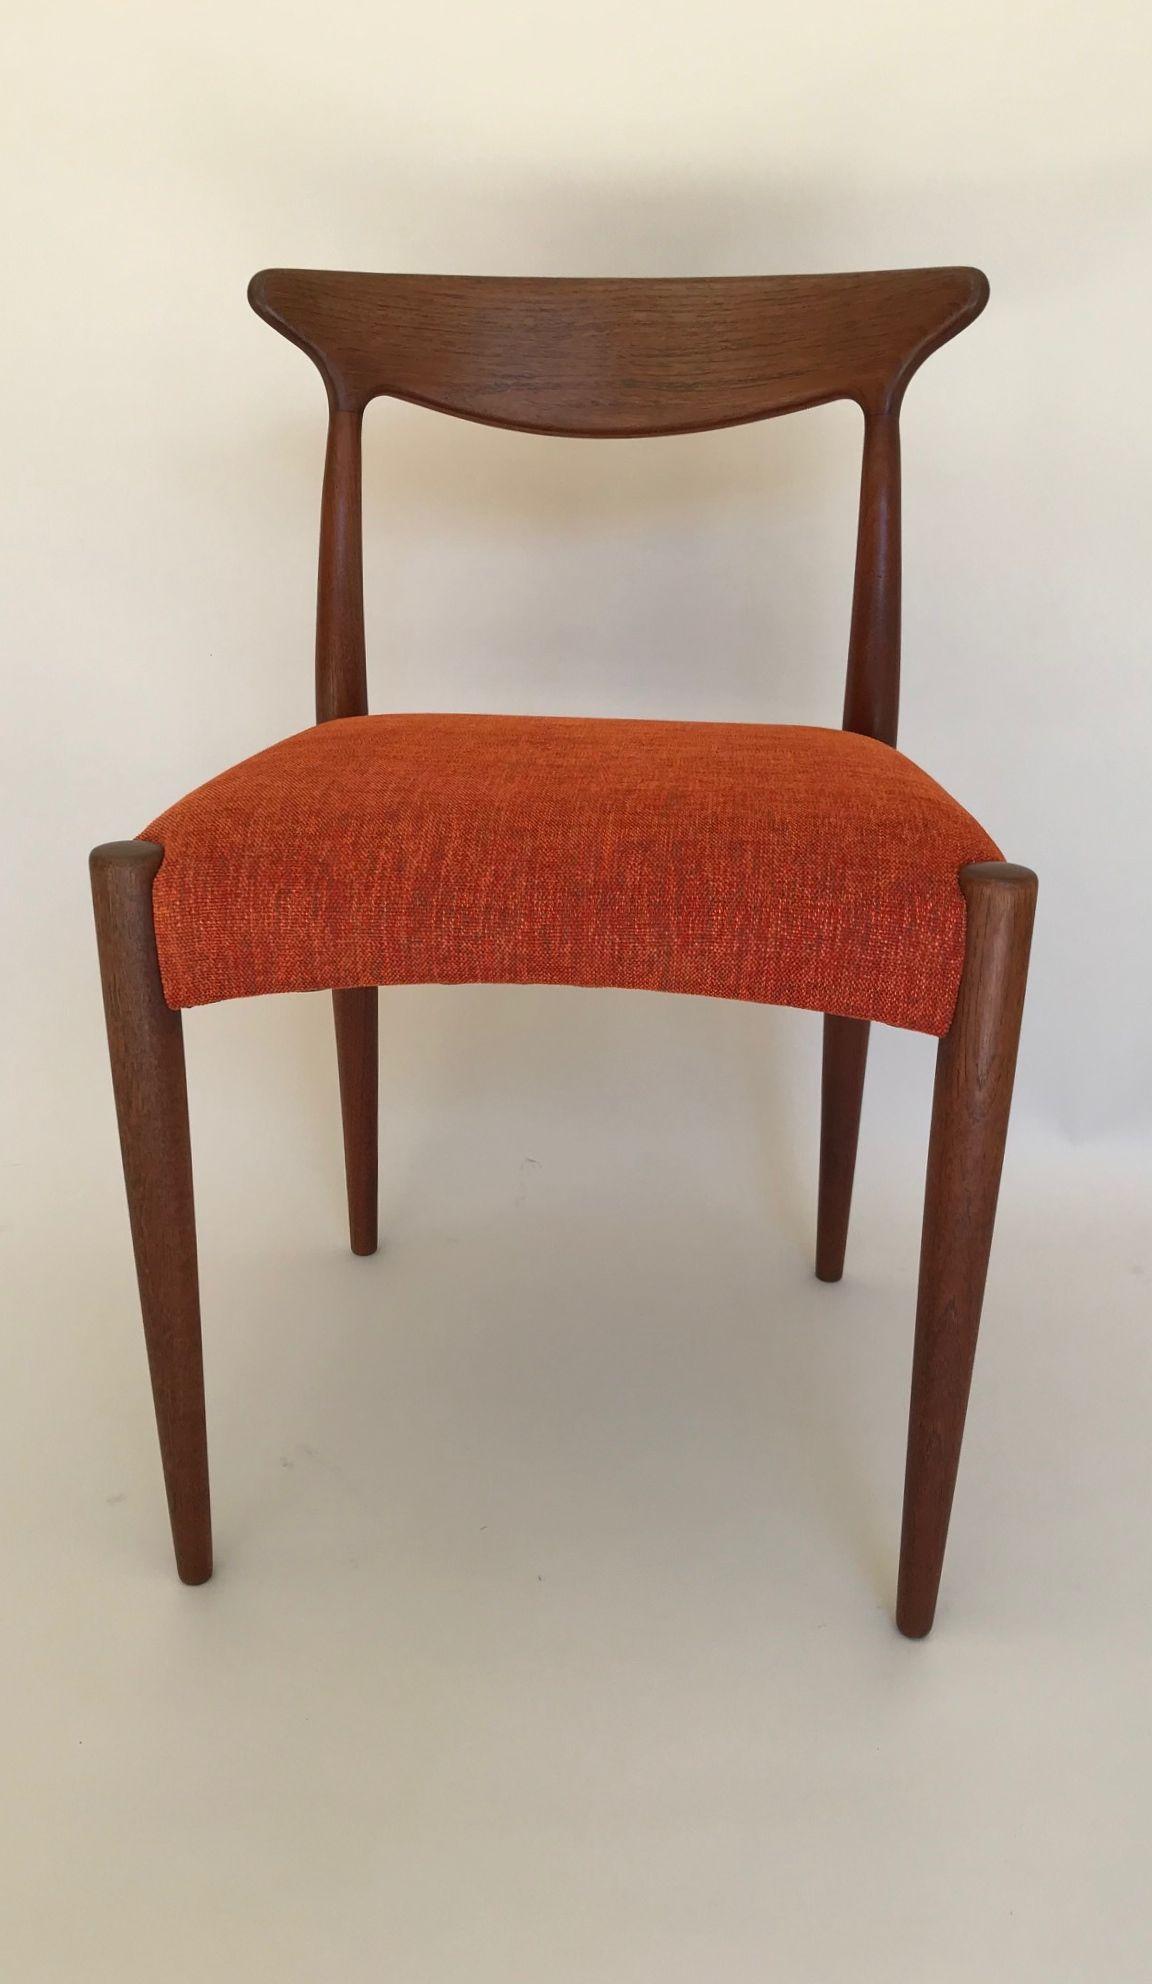 Set of four teak dining chairs designed by Arne Hovmand Olsen. Produced by Mogens Kold Denmark. All chairs are in very good condition, they have been reupholstered in a burnt orange chenille fabric.

 Makers plaque on underside of the chairs.

 